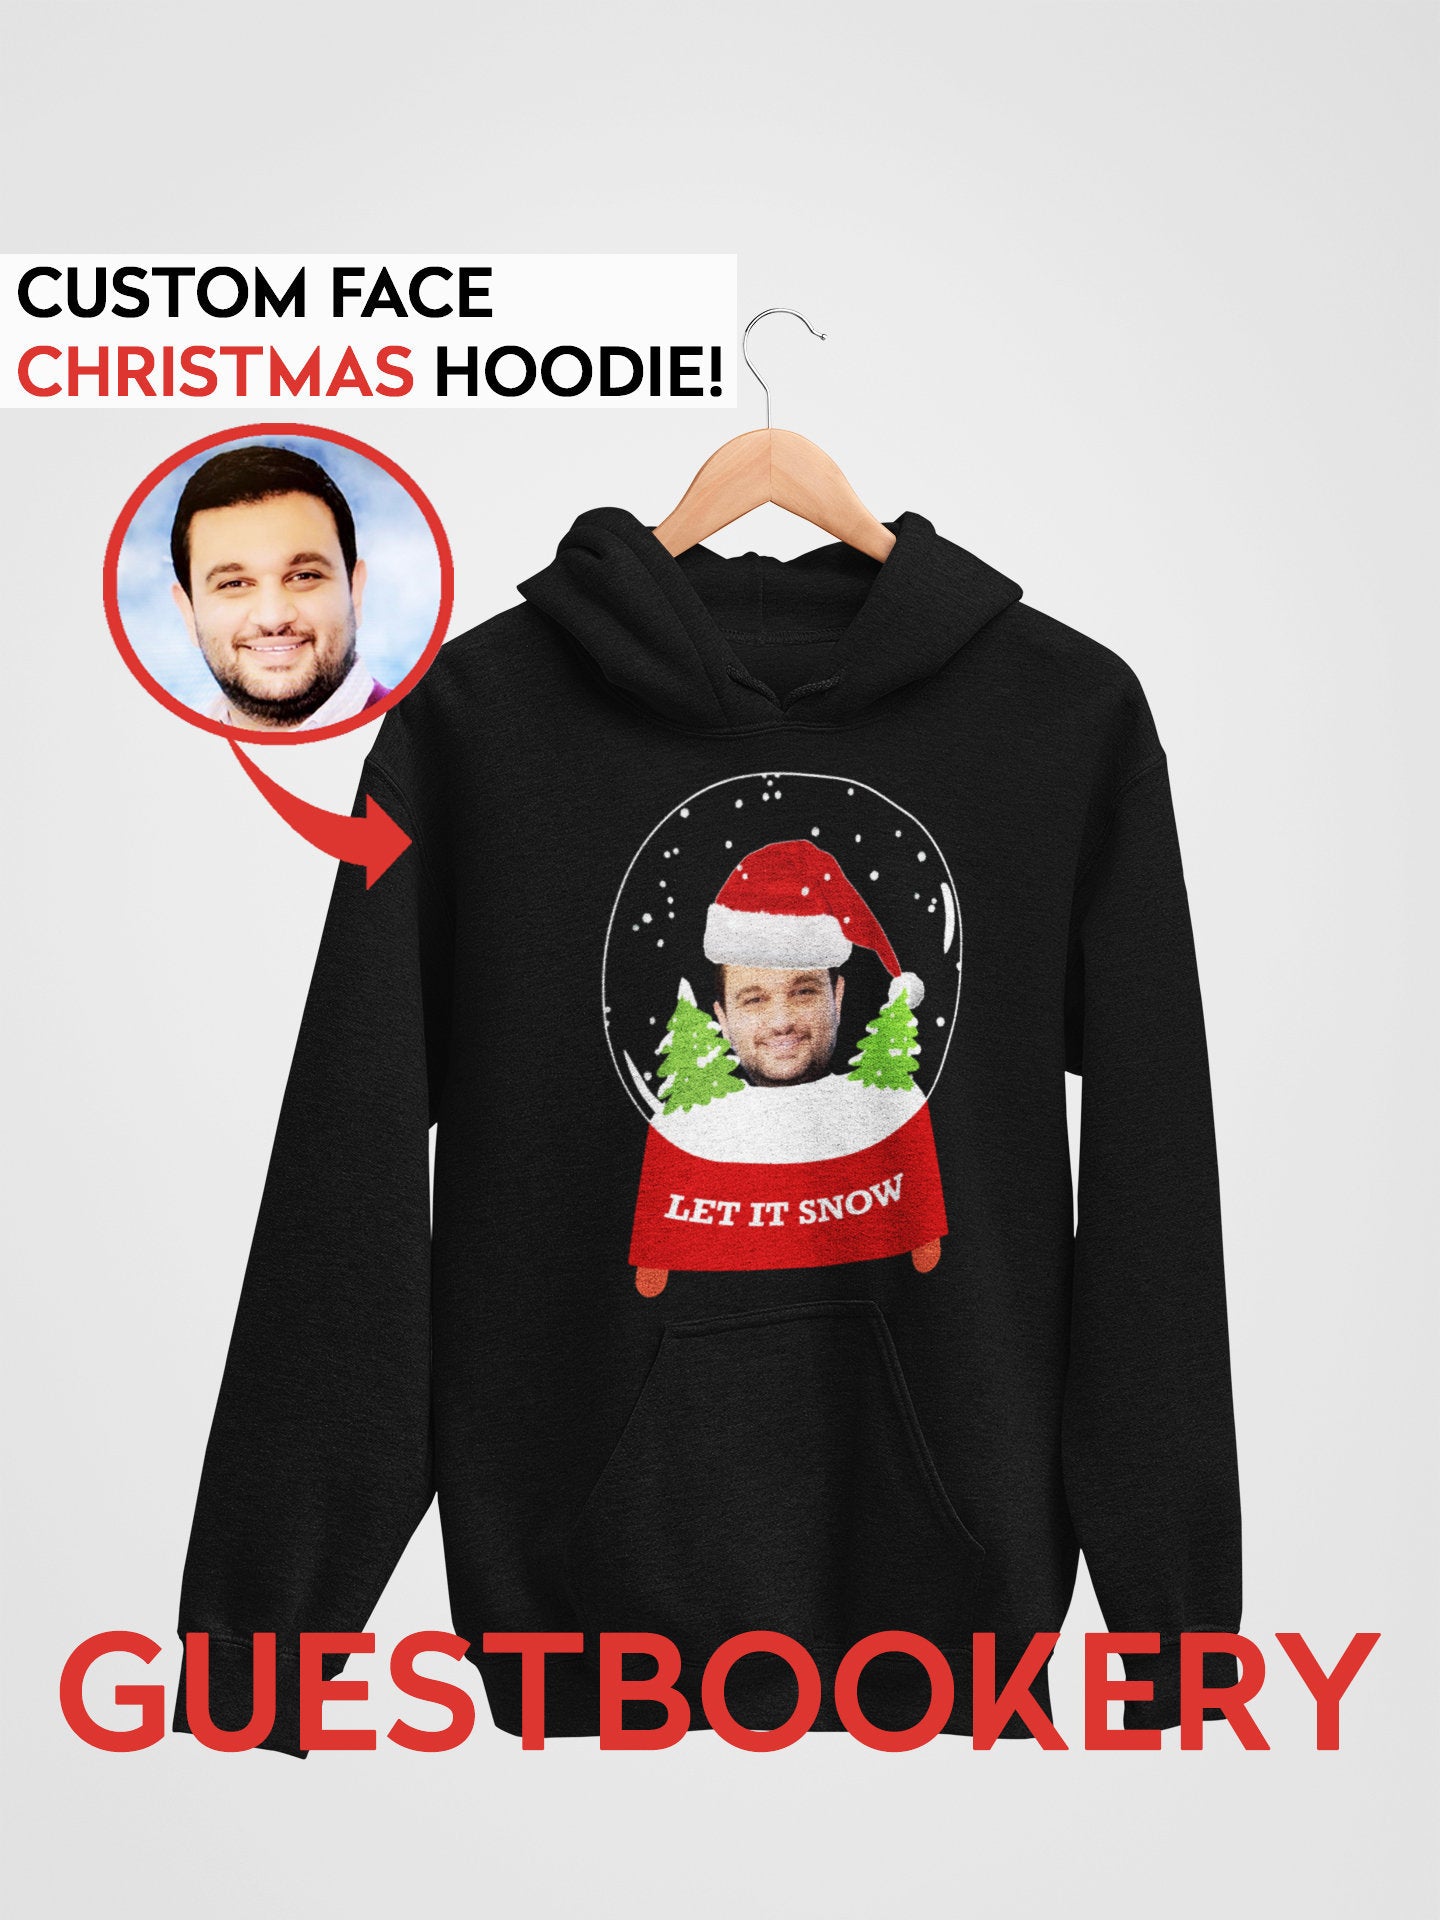 Custom Face Ugly Christmas Hoodie - Snowglobe - Guestbookery